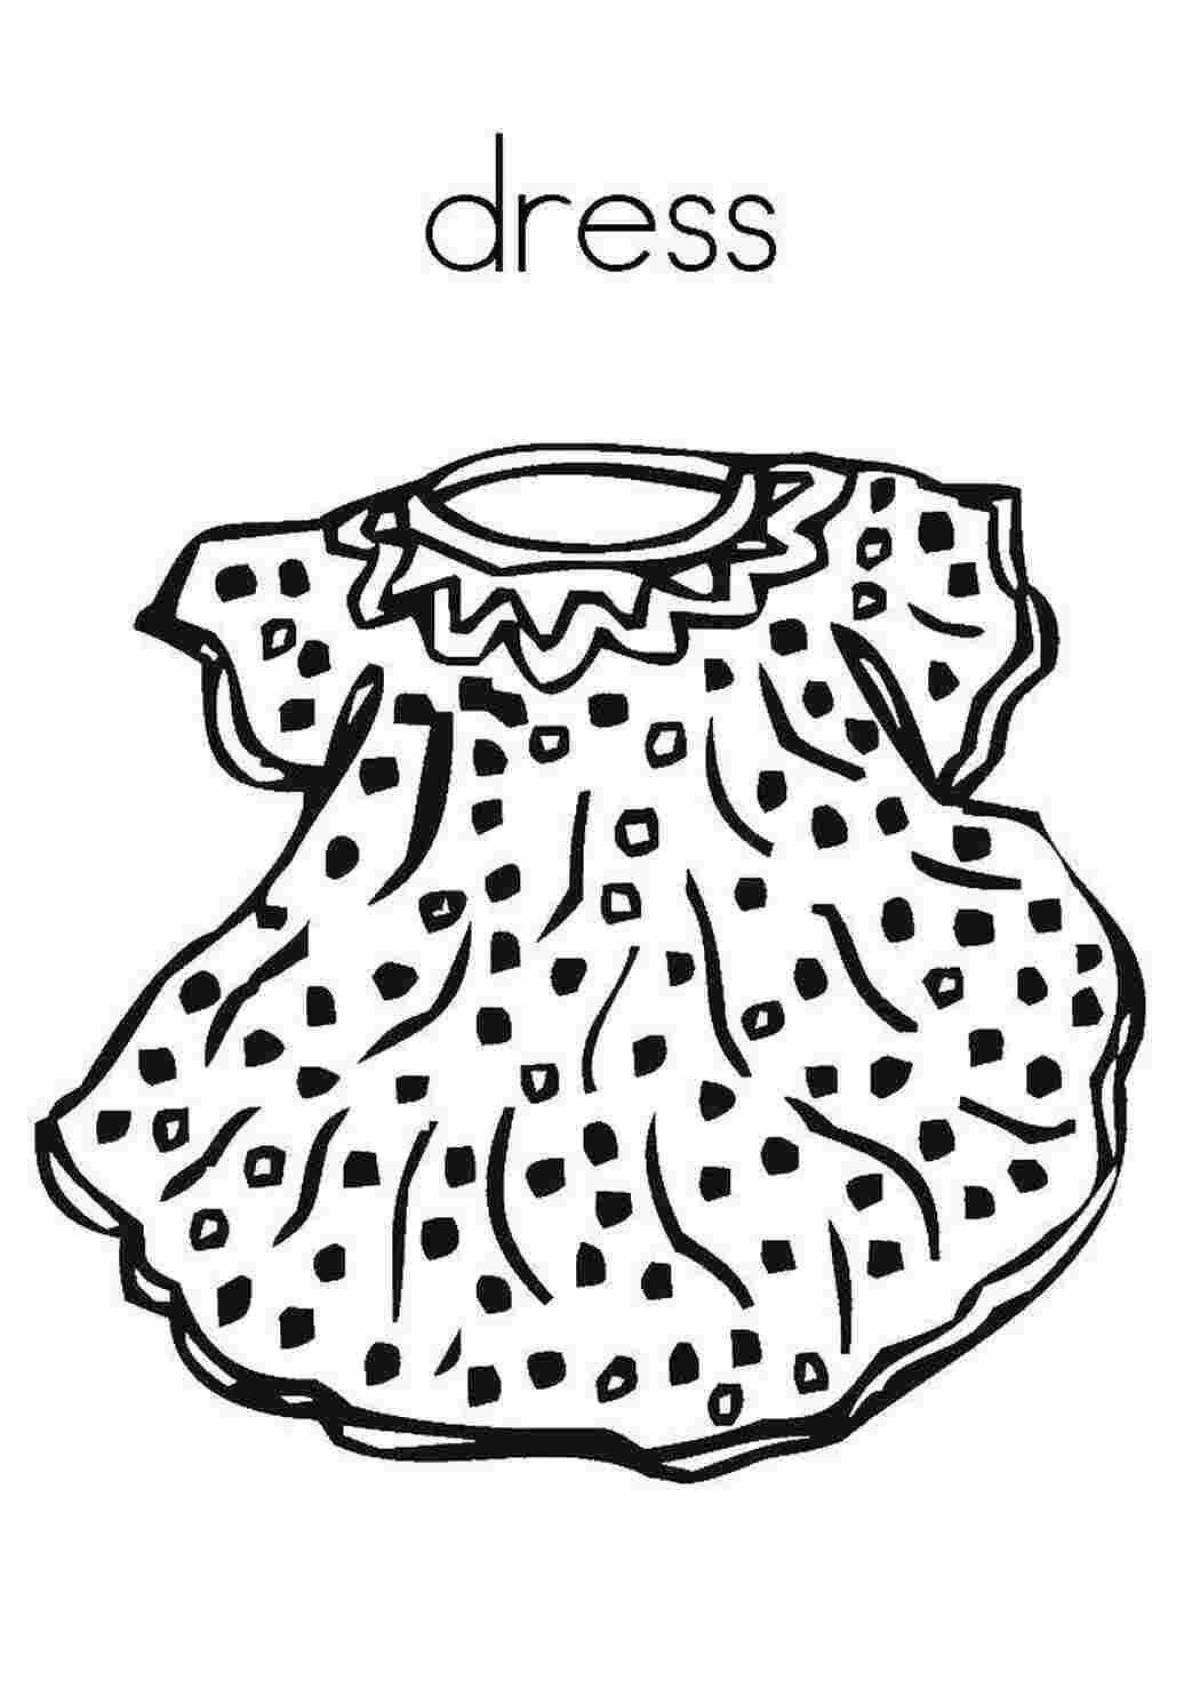 Fancy doll dress coloring page for children 3-4 years old